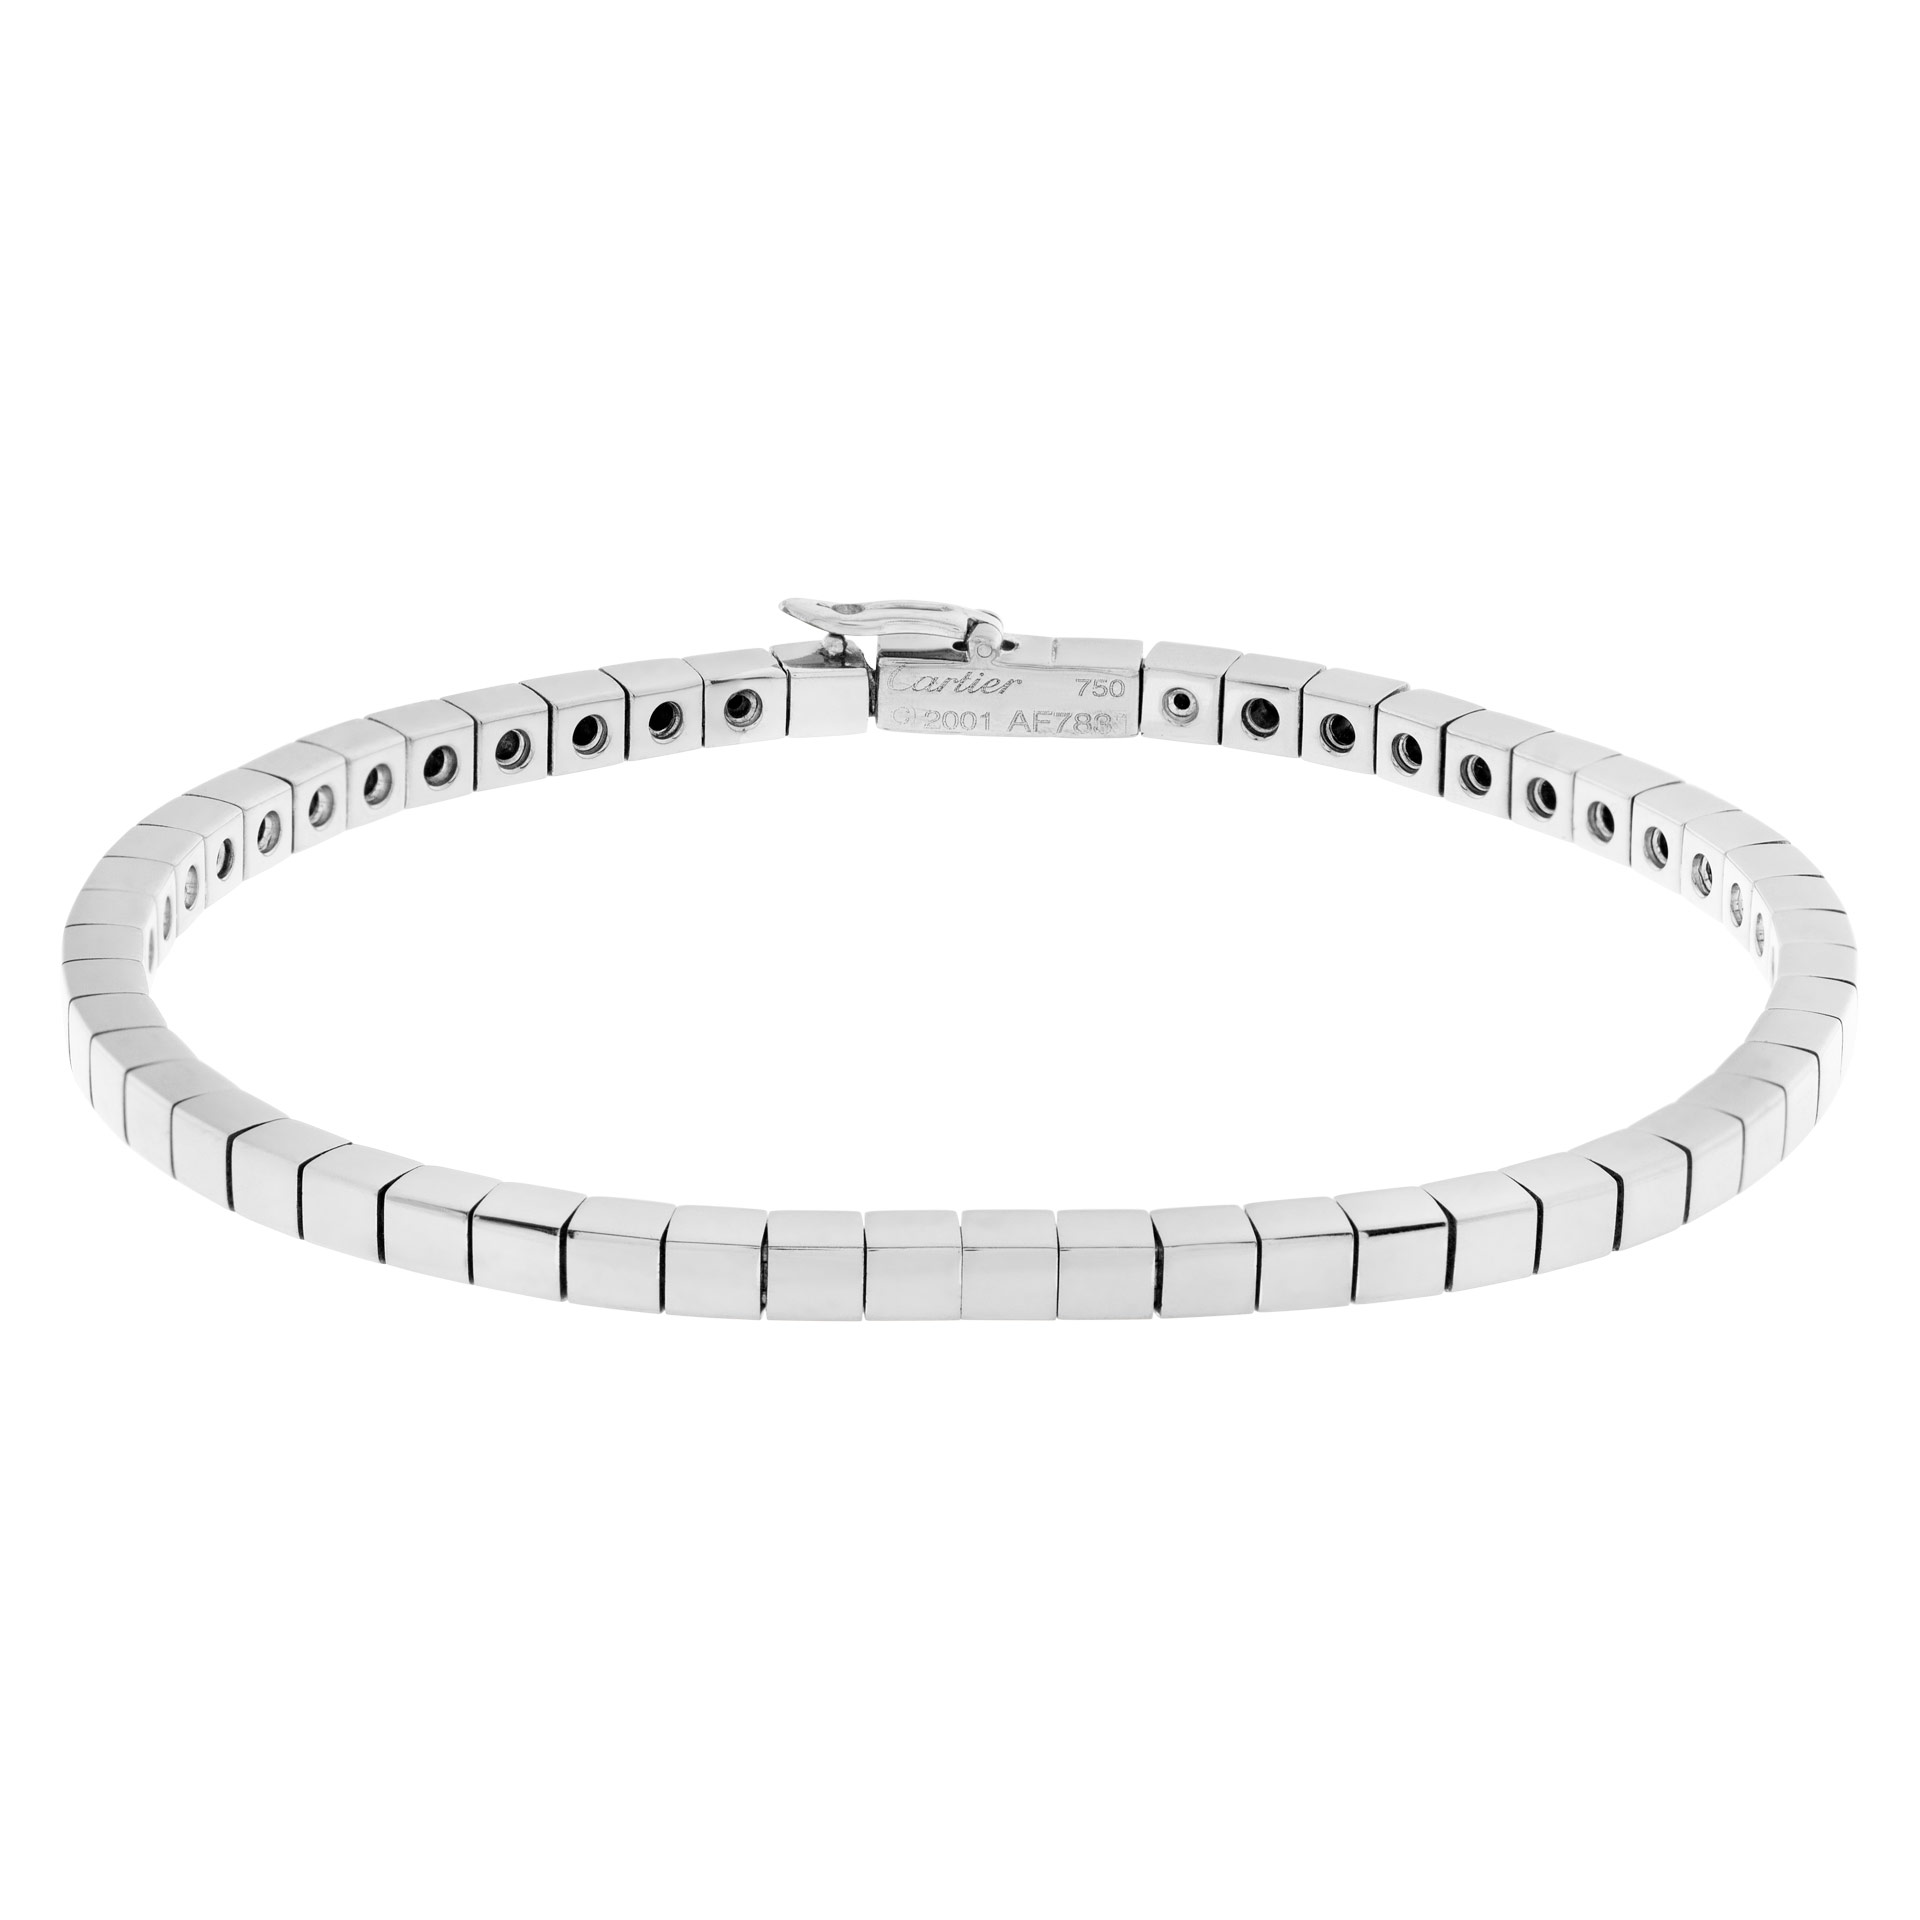 Cartier Lanieres bracelet in 18k white gold. 6.5 inches long. image 1